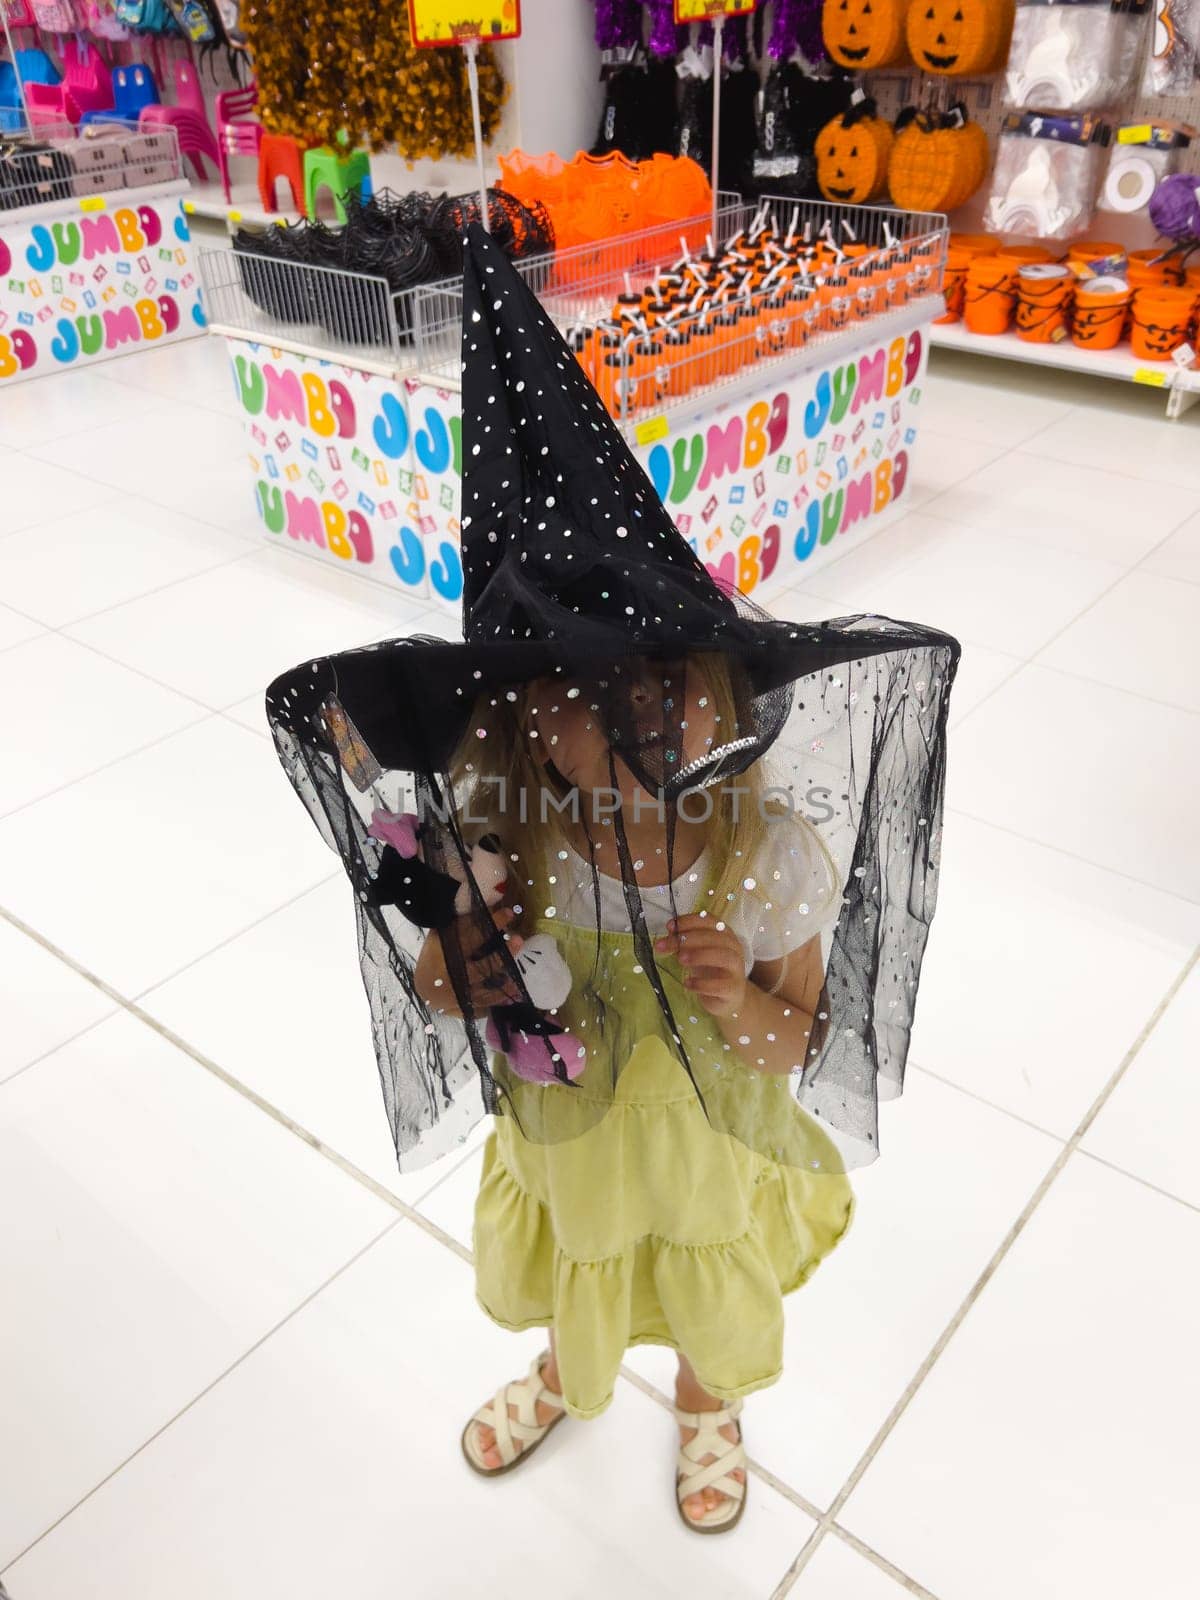 Little girl tries on a pointed witch hat with a black veil in the store by Nadtochiy